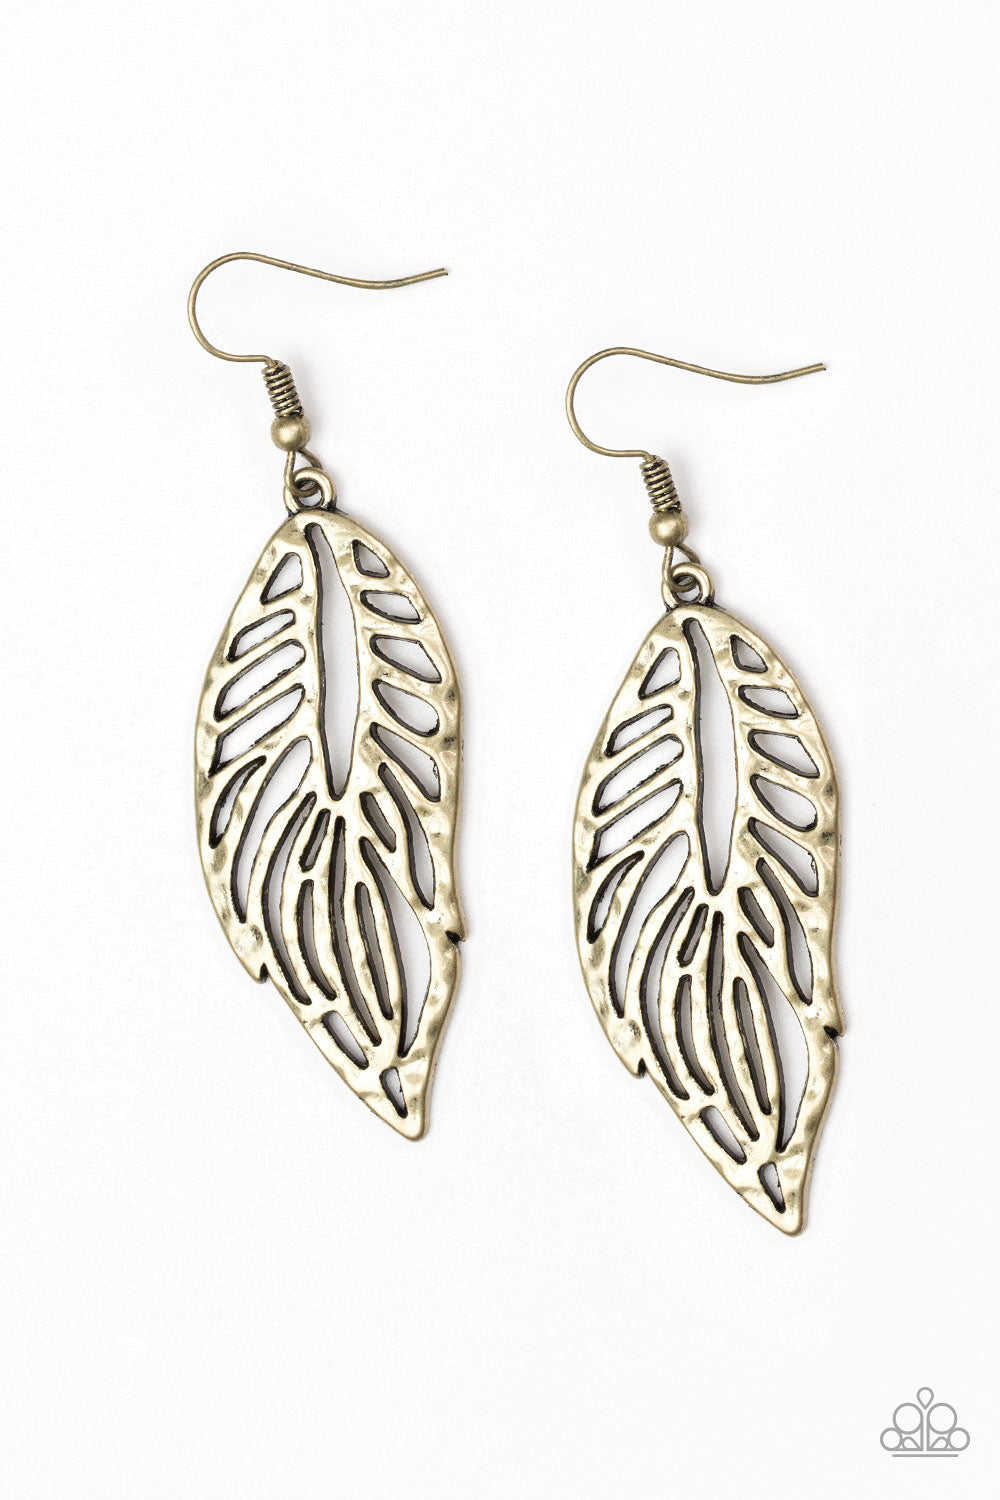 Paparazzi earring - Come Home To Roost - Brass